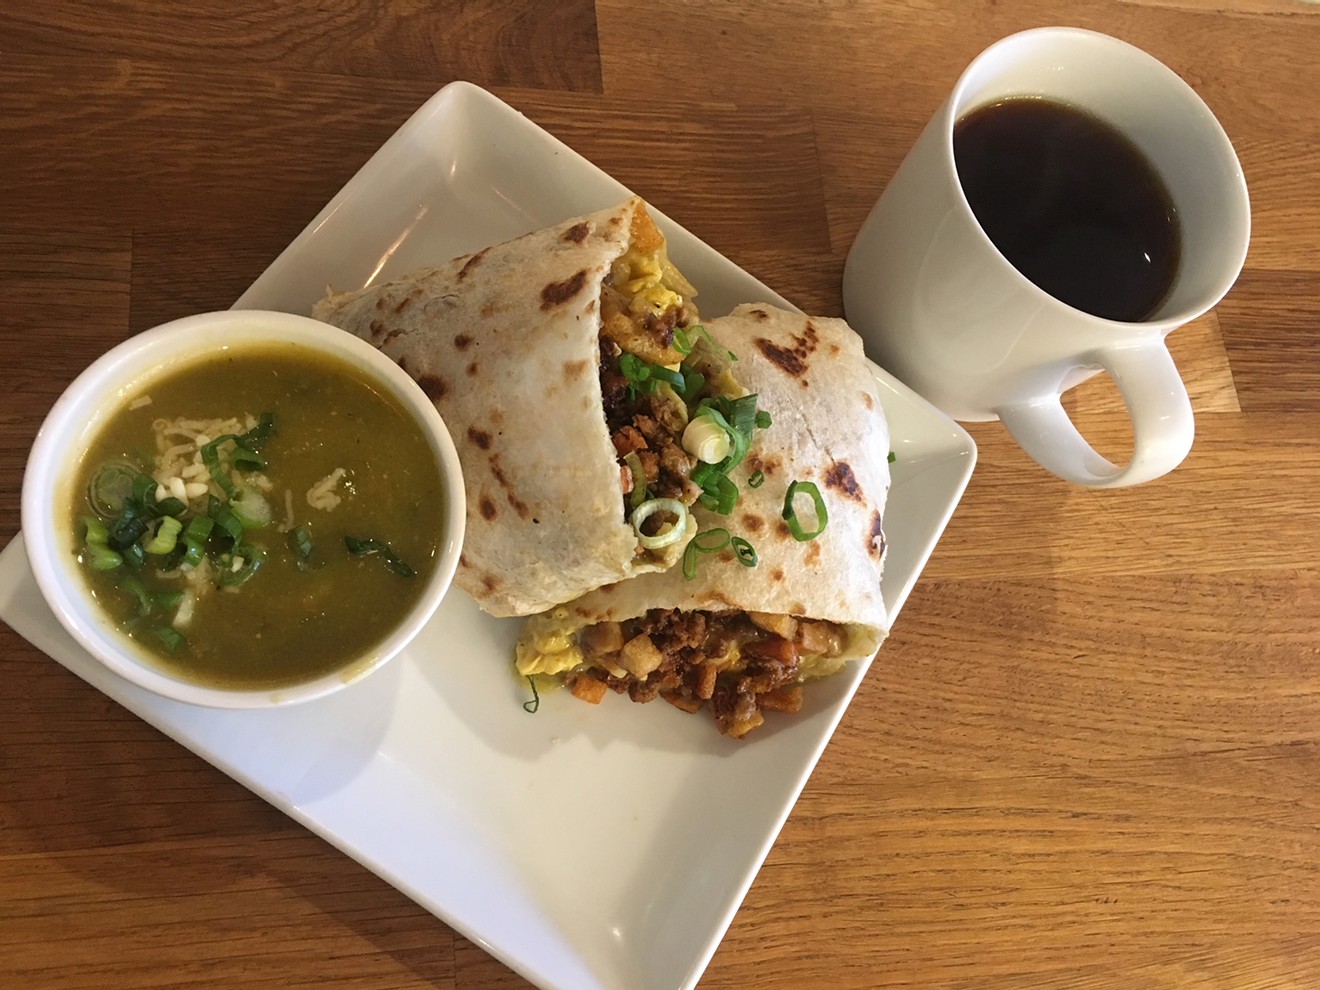 Onefold's breakfast burrito is discounted to $5 between 7 and 9 a.m. on weekdays.